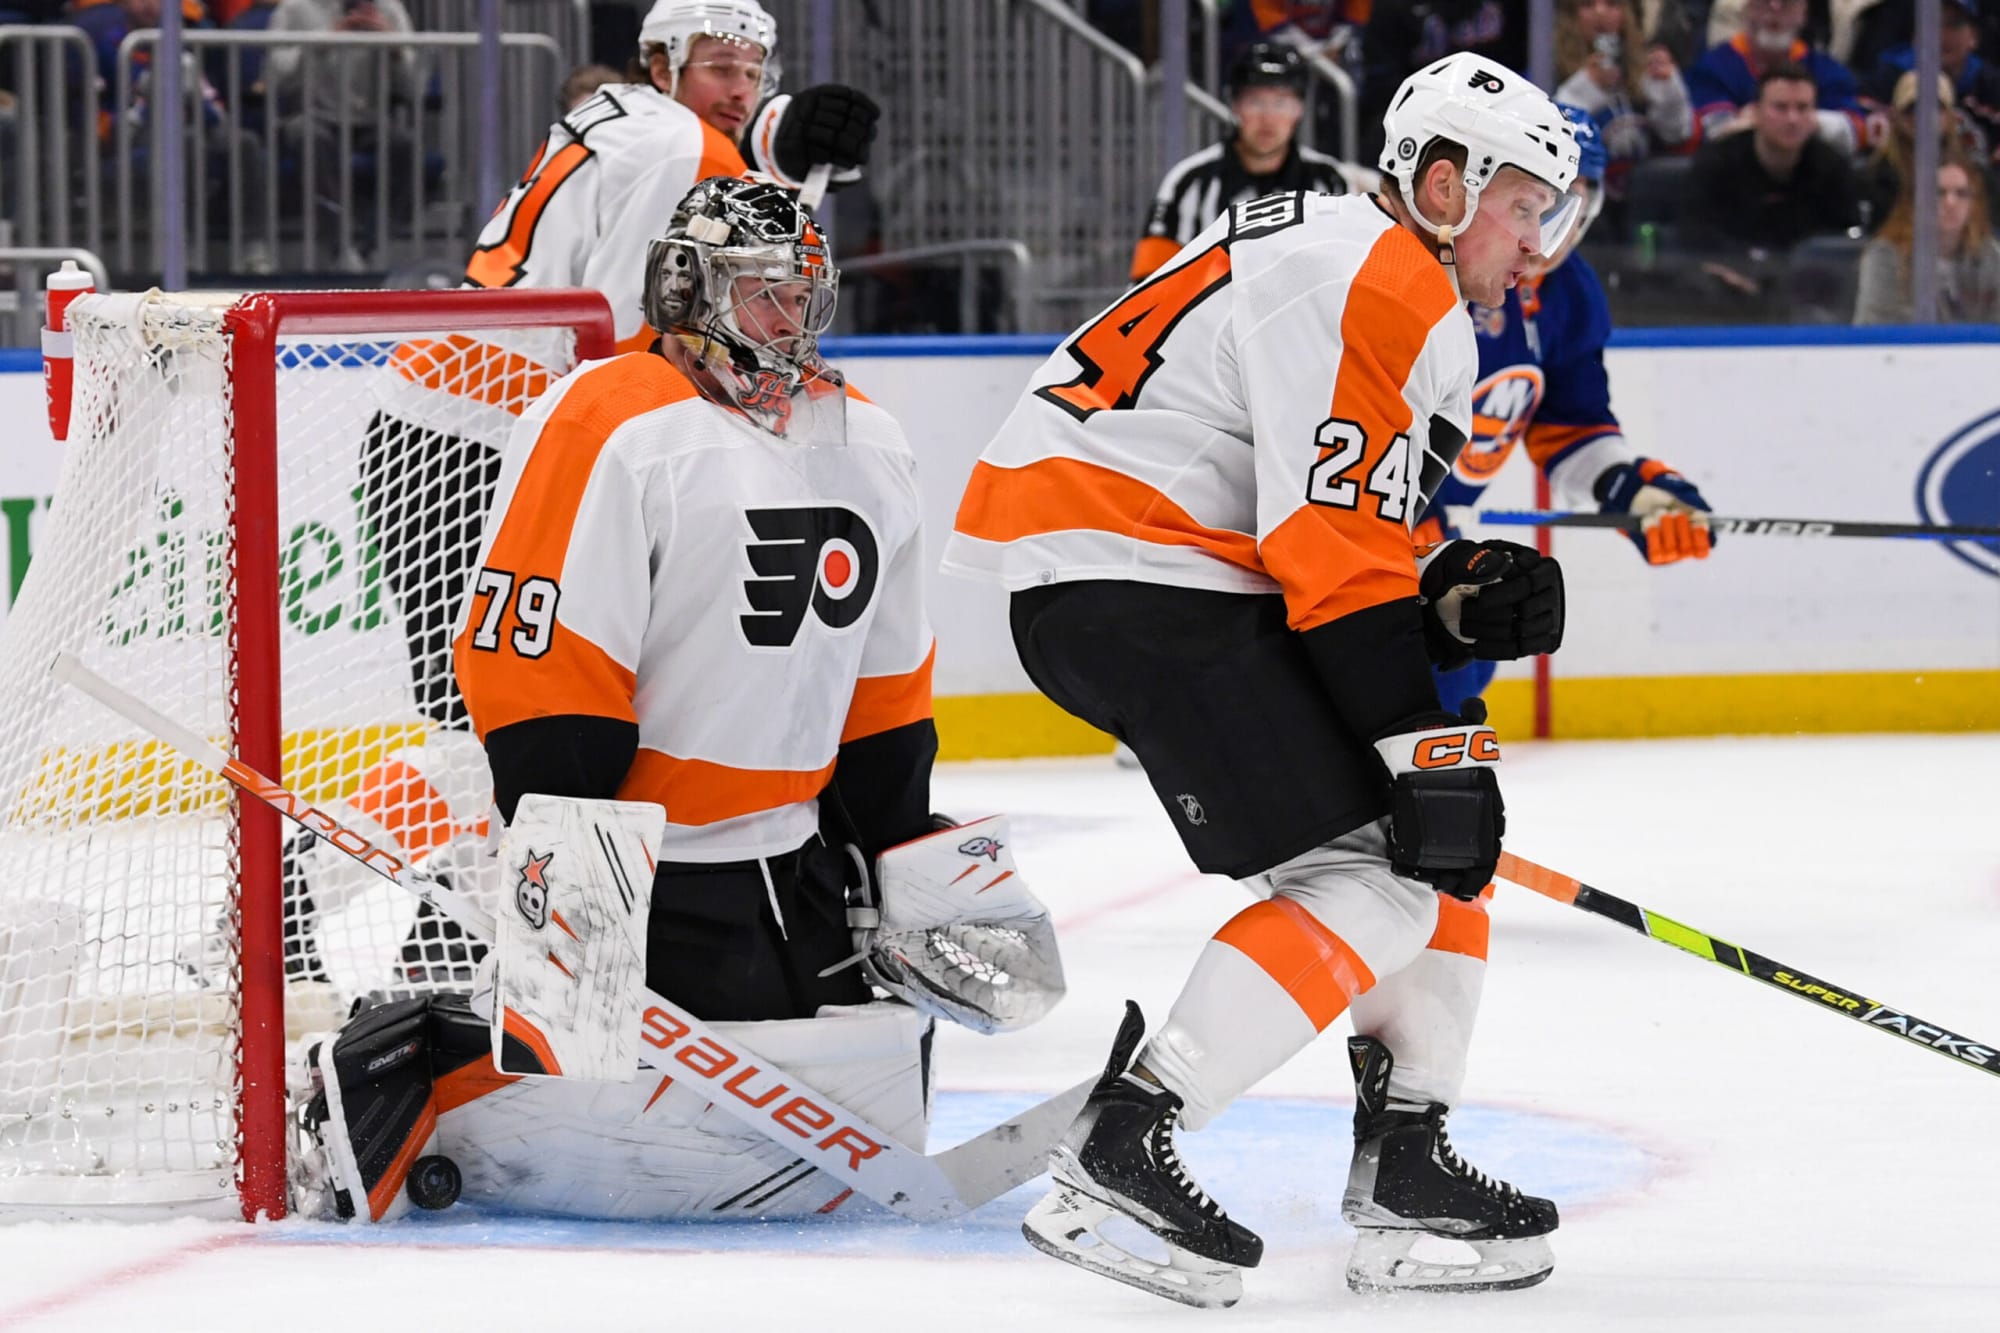 Brière Won't Fully Commit, but Dubs Carter Hart as Likely